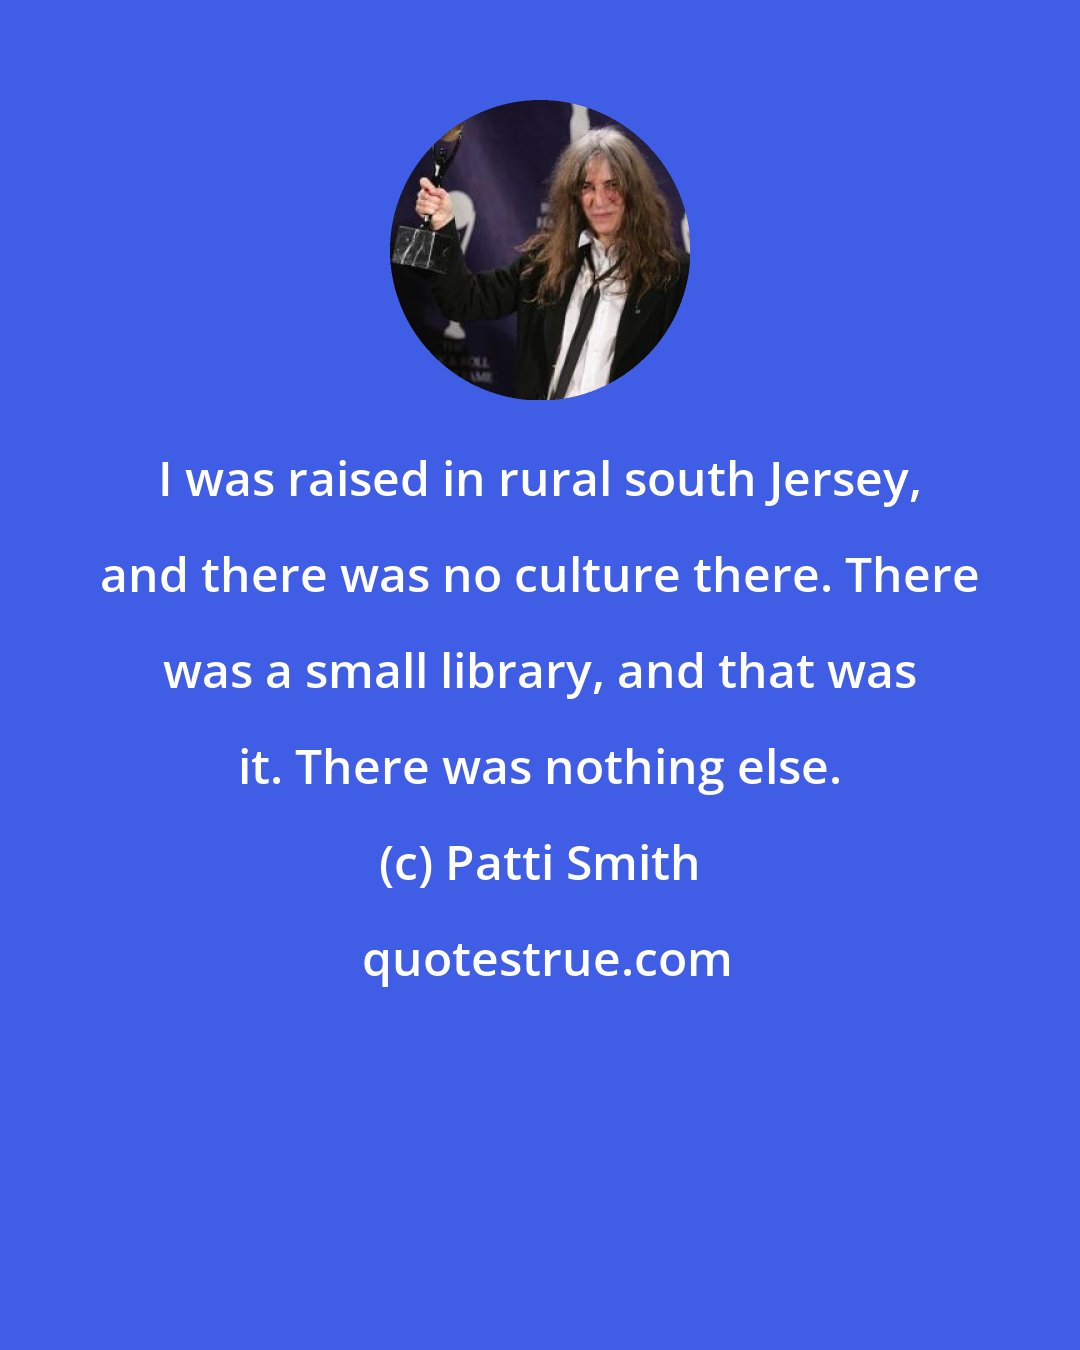 Patti Smith: I was raised in rural south Jersey, and there was no culture there. There was a small library, and that was it. There was nothing else.